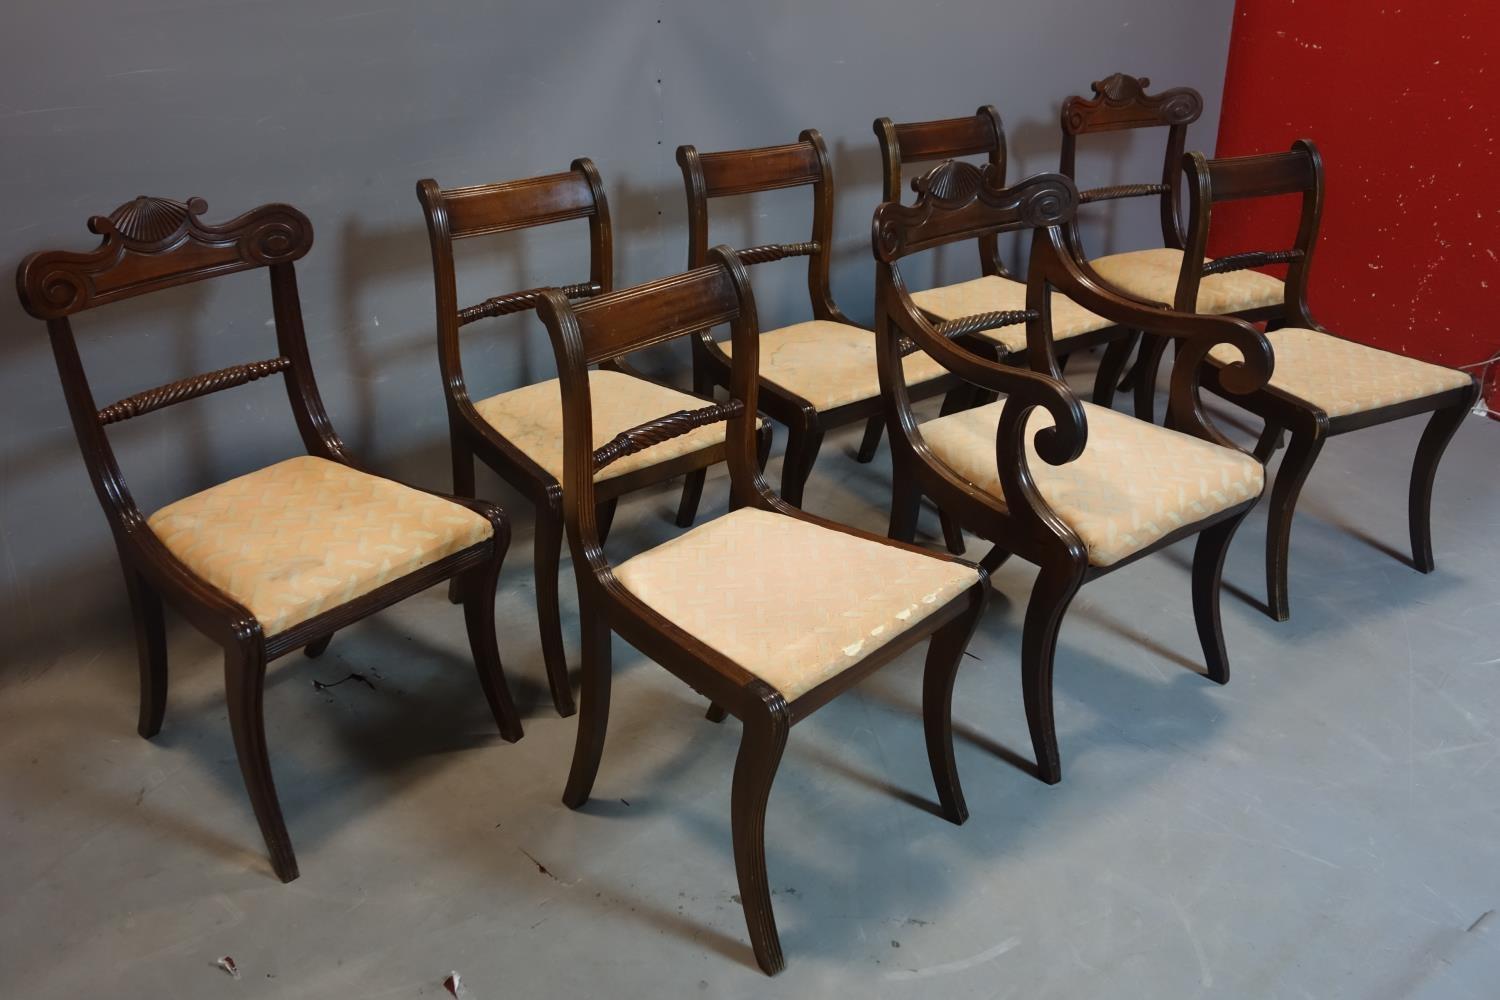 A harlequin set of 8 mahogany dining chairs, to include 3 Regency period and 5 Regency style